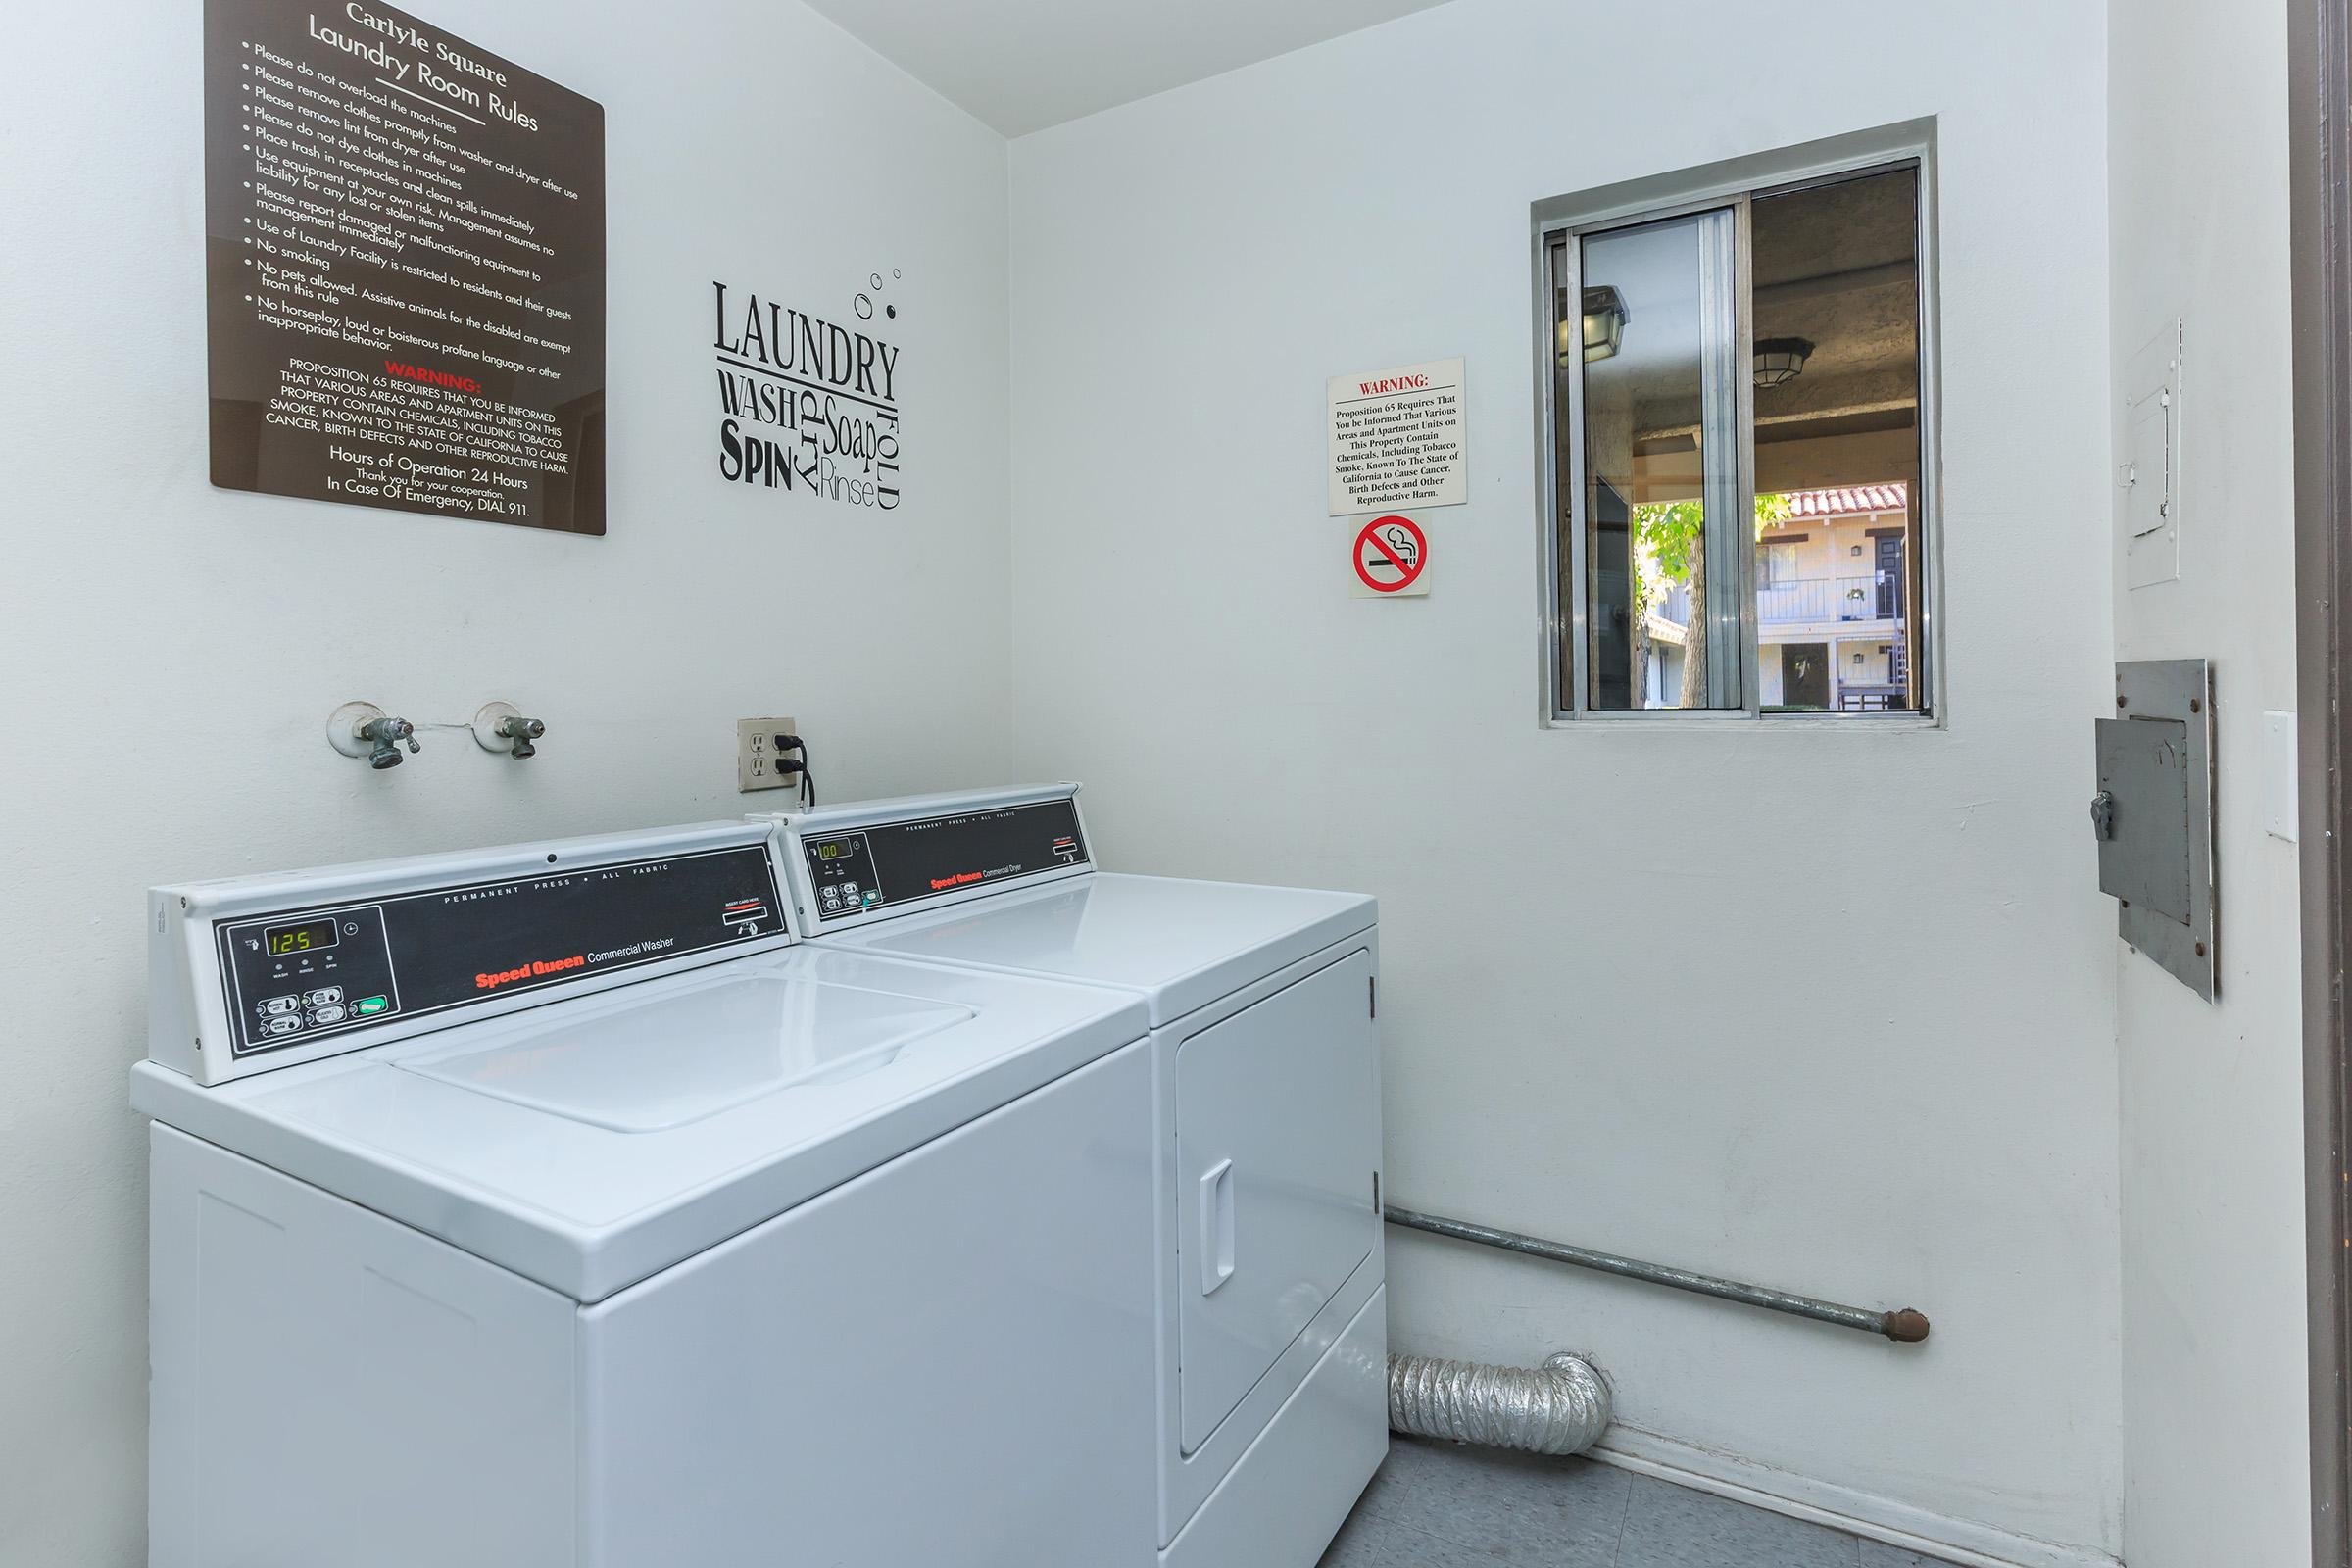 Washer and dryer in the community laundry room